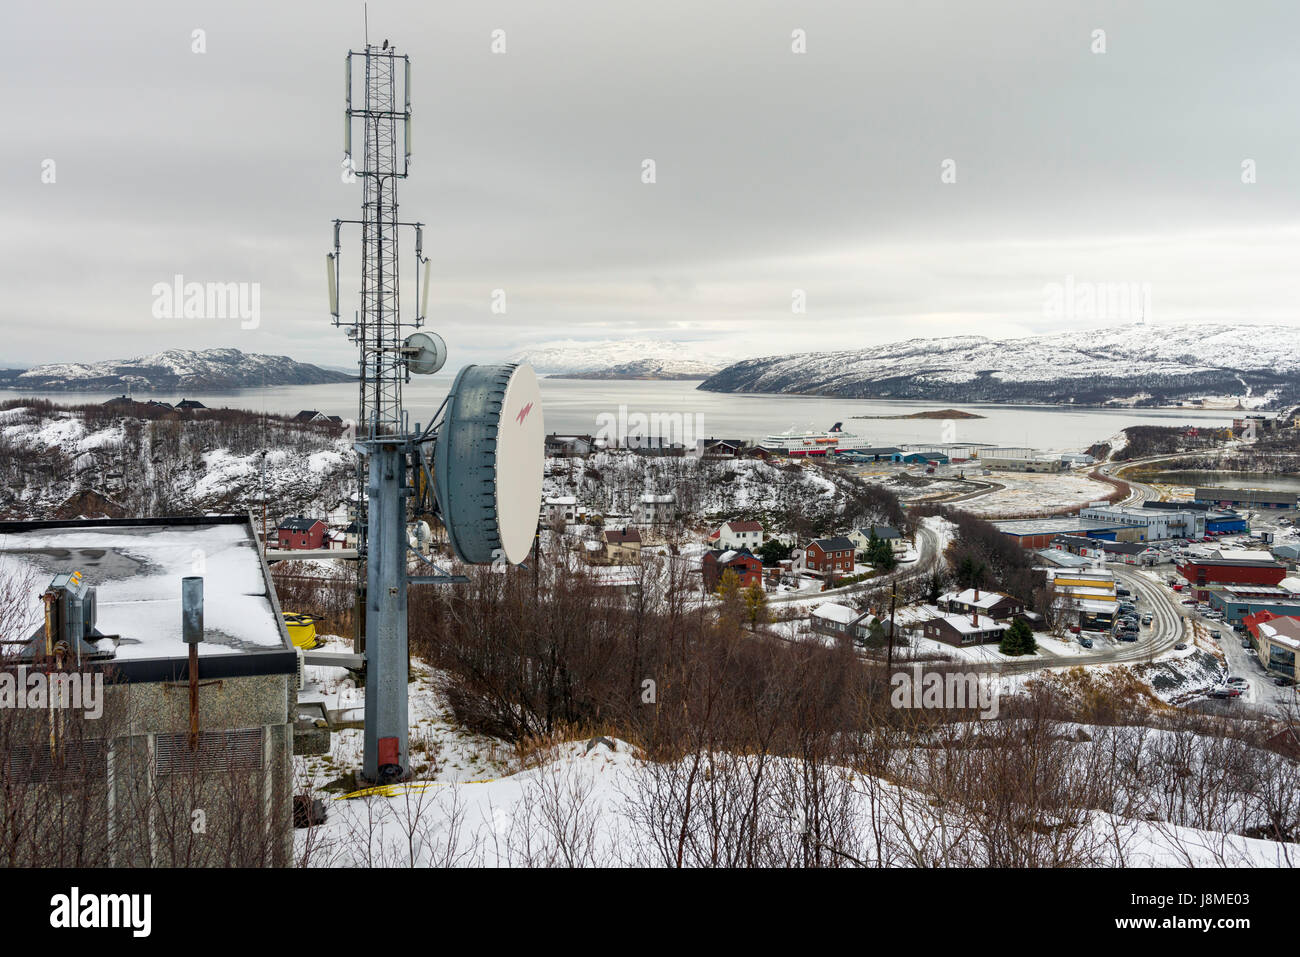 View over the town and port of Kirkenes in the municipality of Sør-Varanger, Finnmark County, Norway Stock Photo